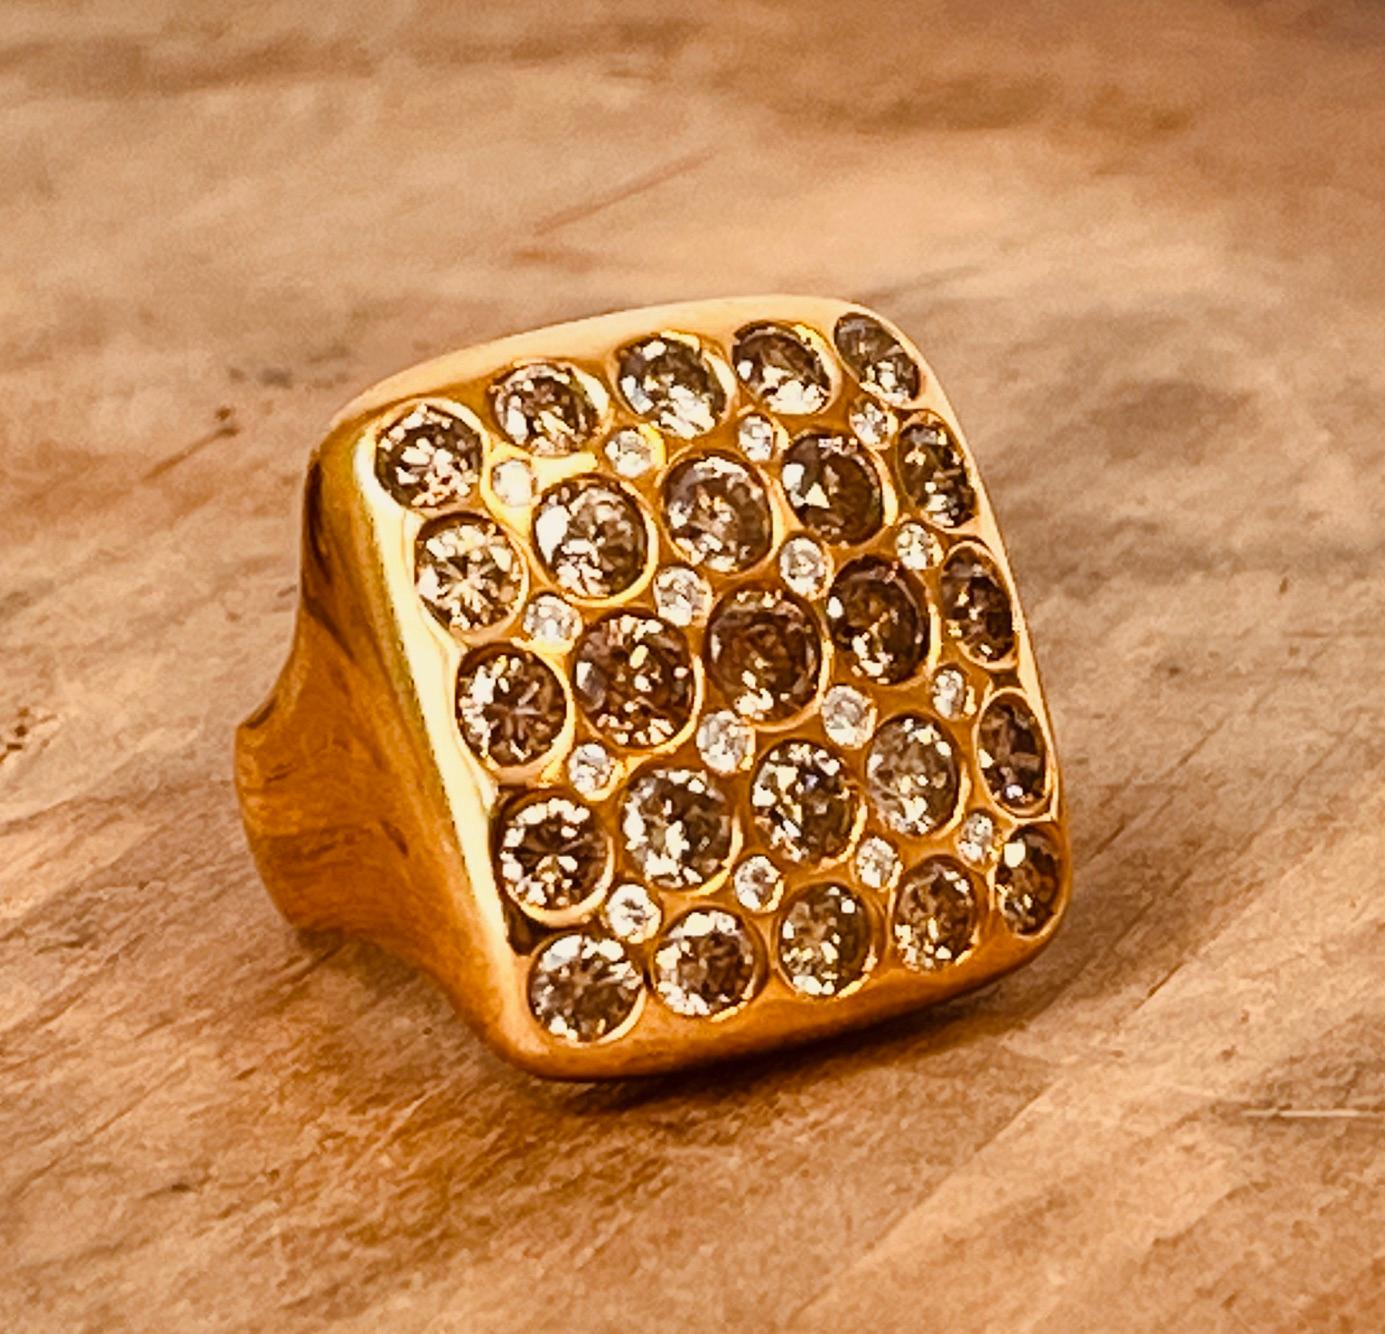 GAVELLO 18ct yellow gold ring in a cushion shape mounted with brown, light brown and white diamonds. Size of cushion: 27mm x 28mm (2.7cm x 2.8cm). Diamonds total weight of approximately 8cts. Gross weight of 29 grams. Signed on the shoulders Gavello